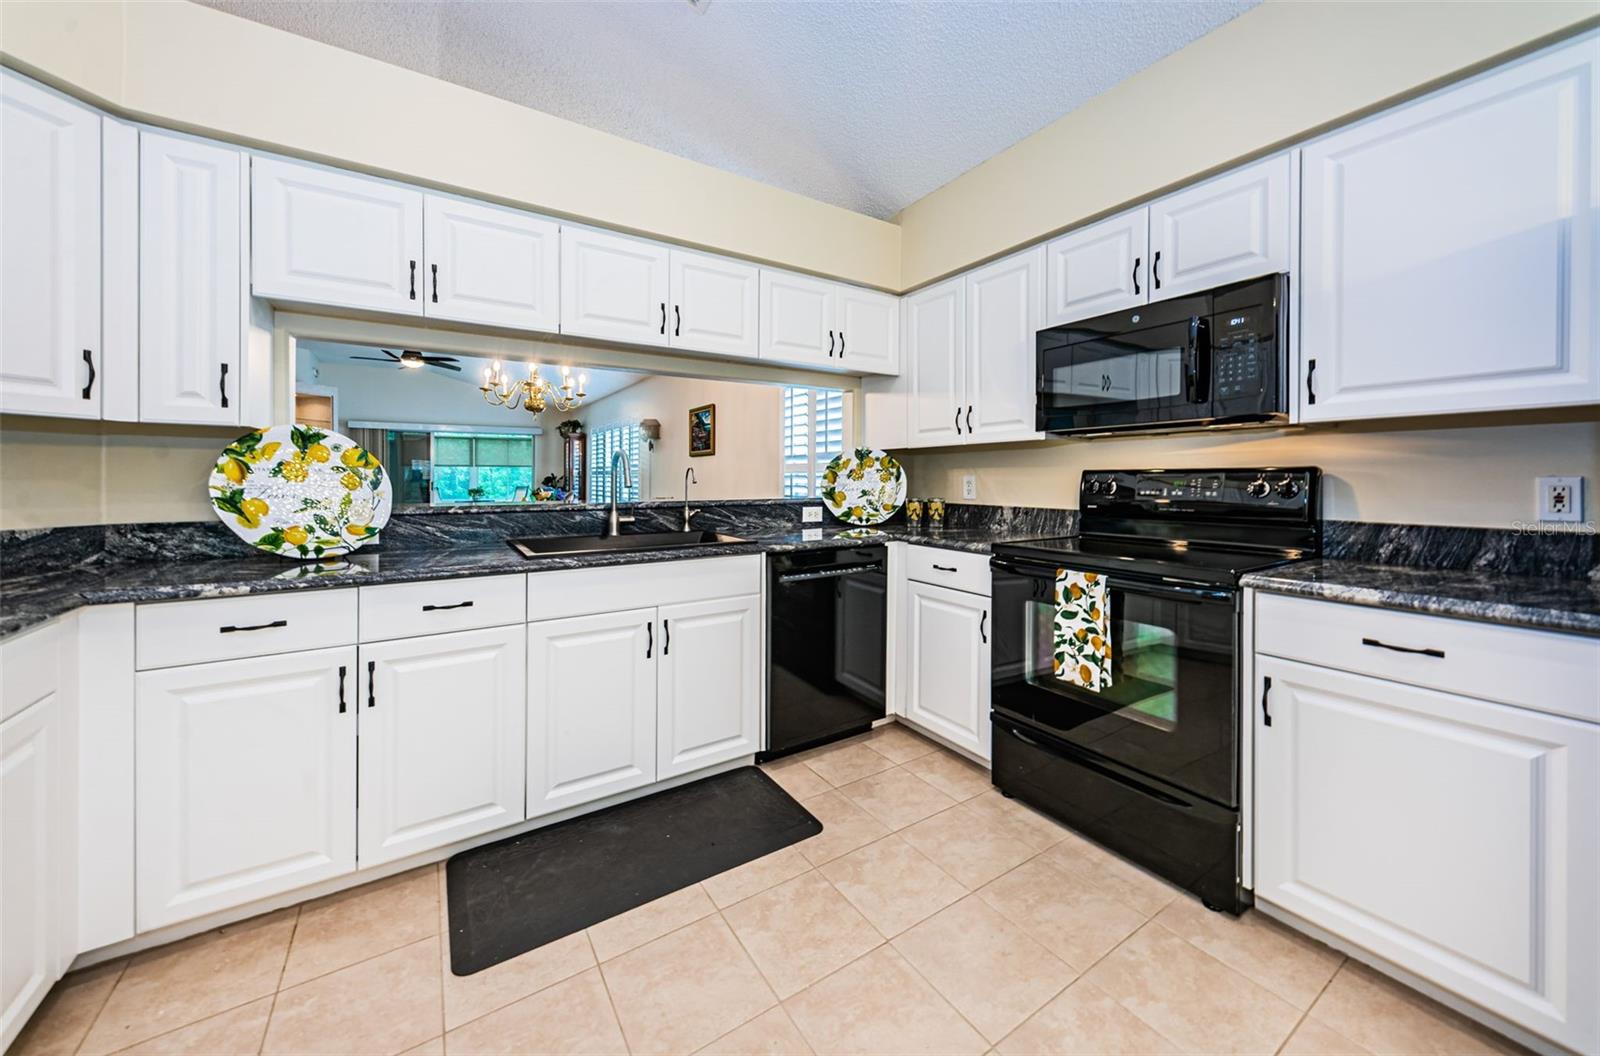 Tile Floors, Cabinets with pull out Drawers & Granite Counters